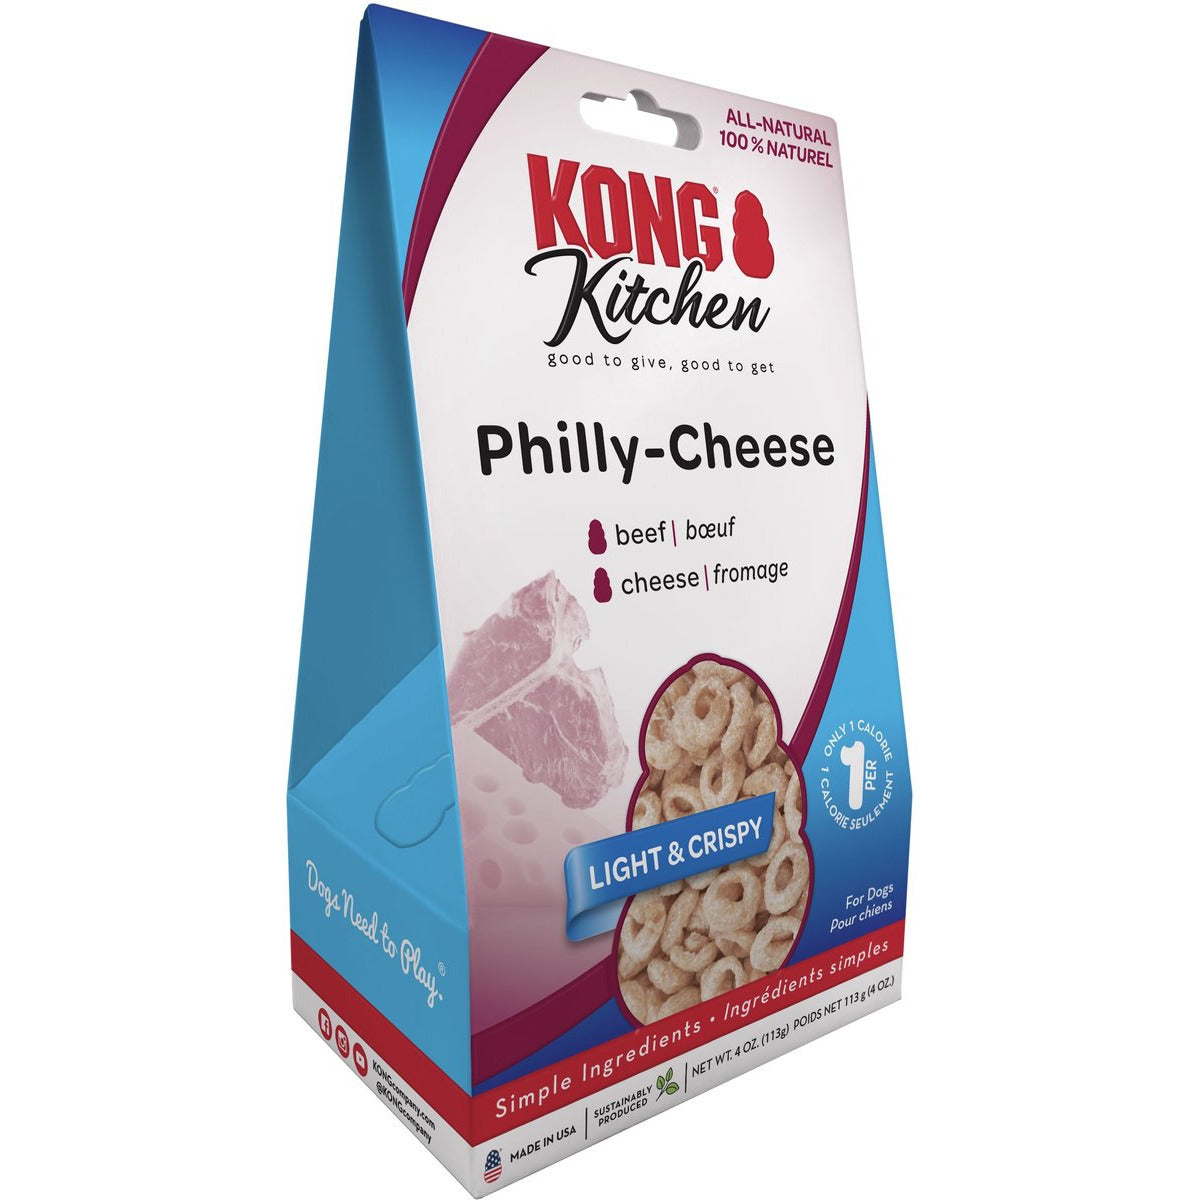 Kong Kitchen Crunchy Biscuit Philly Cheese Dog Treats  Dog Treats  | PetMax Canada